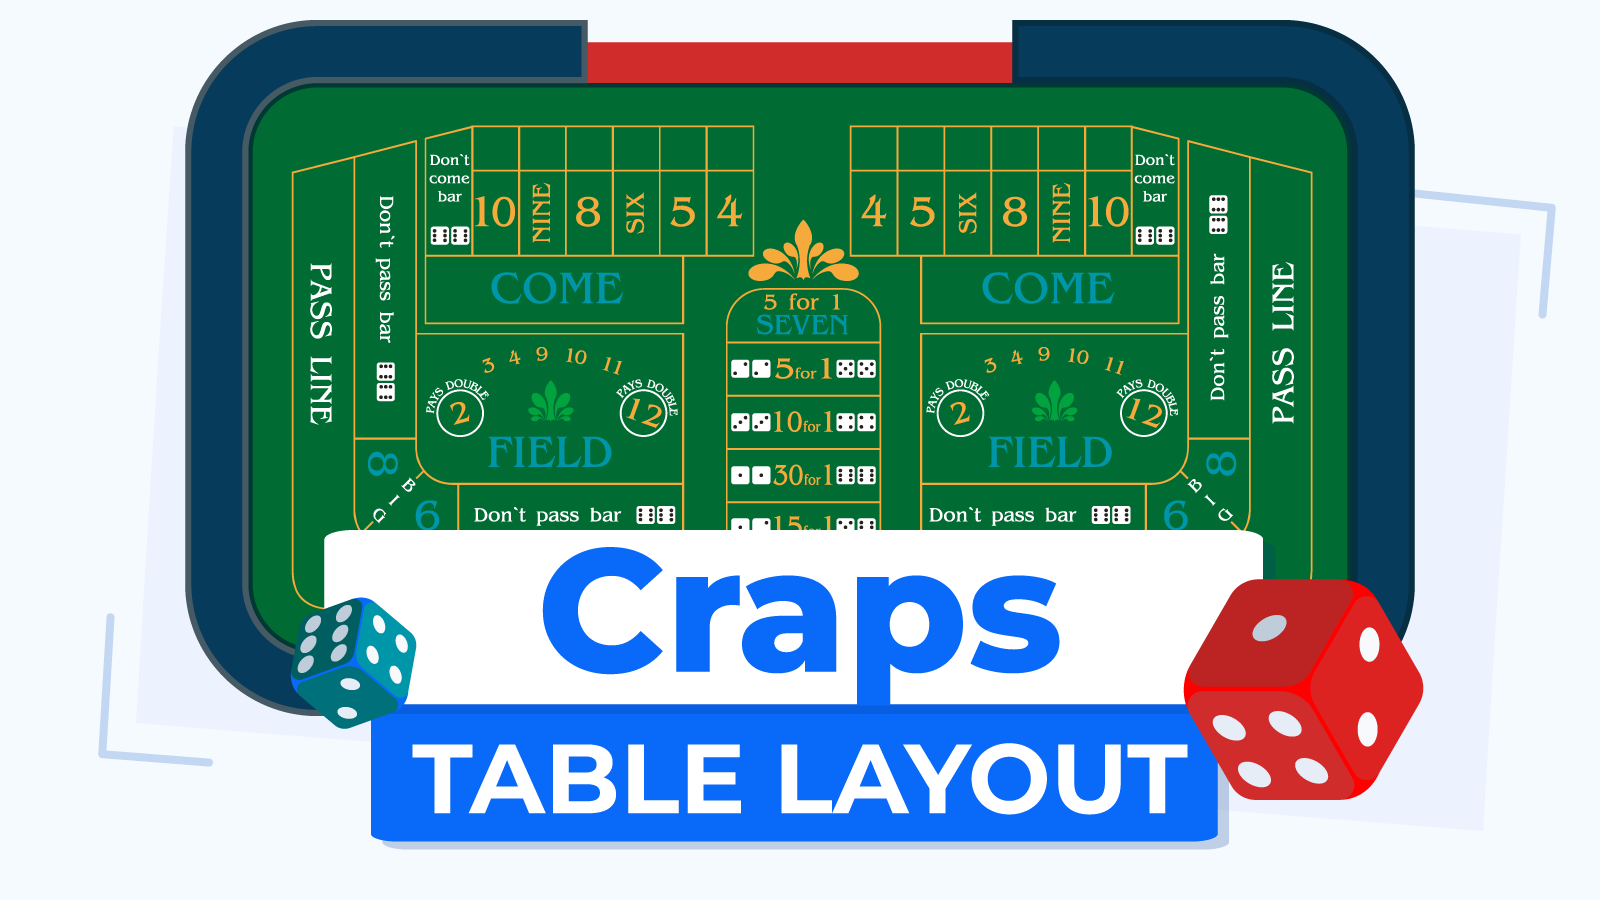 Here Is What You Should Know About the Craps Table Layout